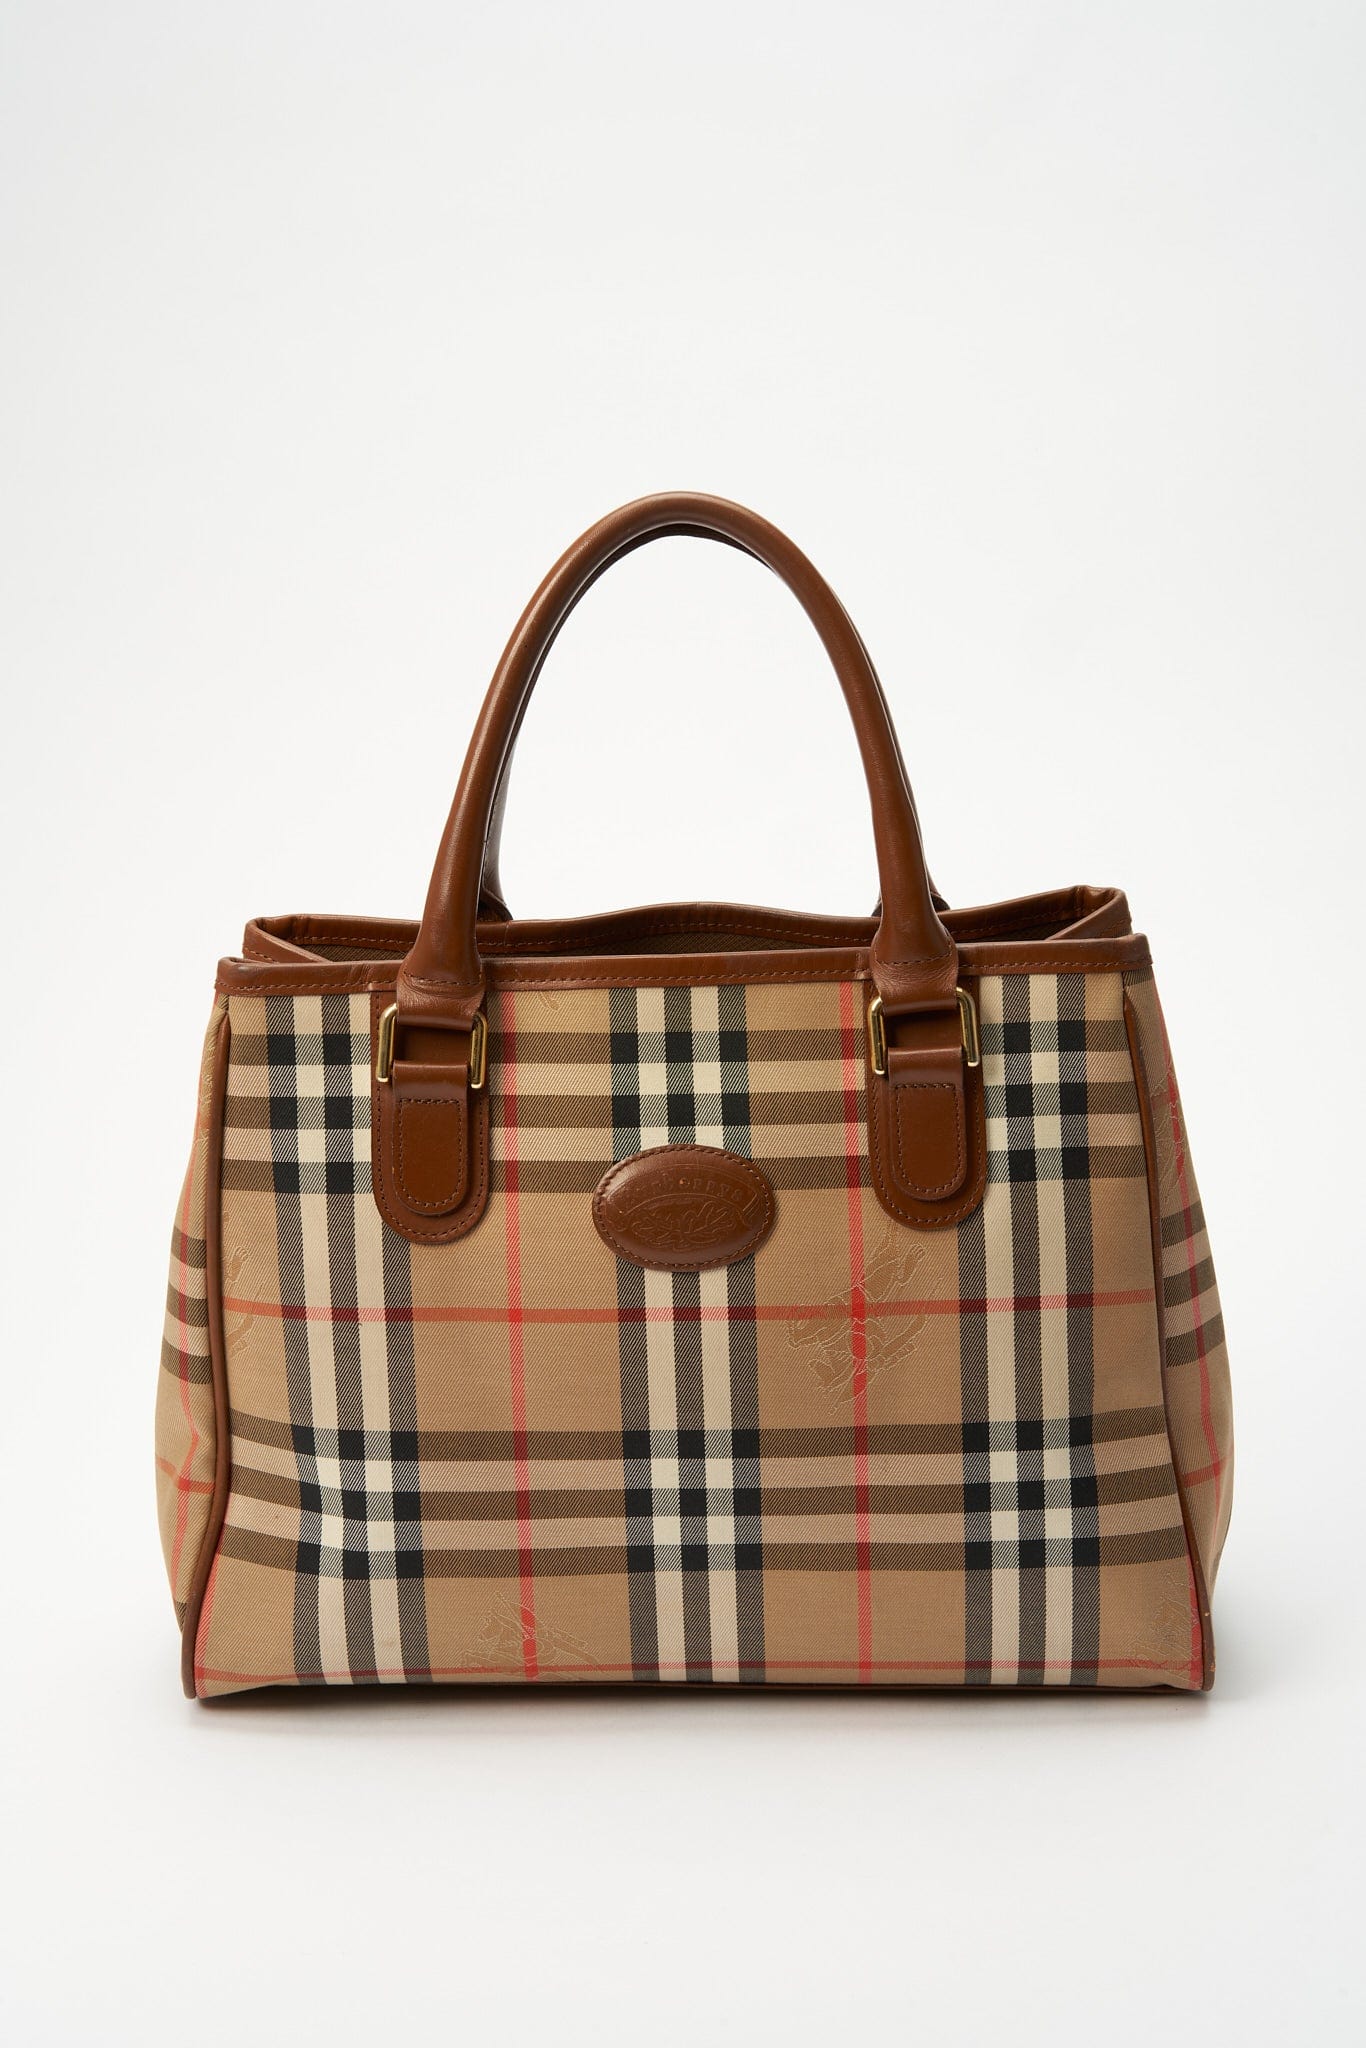 Vintage Burberry Tote Bag With Tan Leather Trim – The Hosta